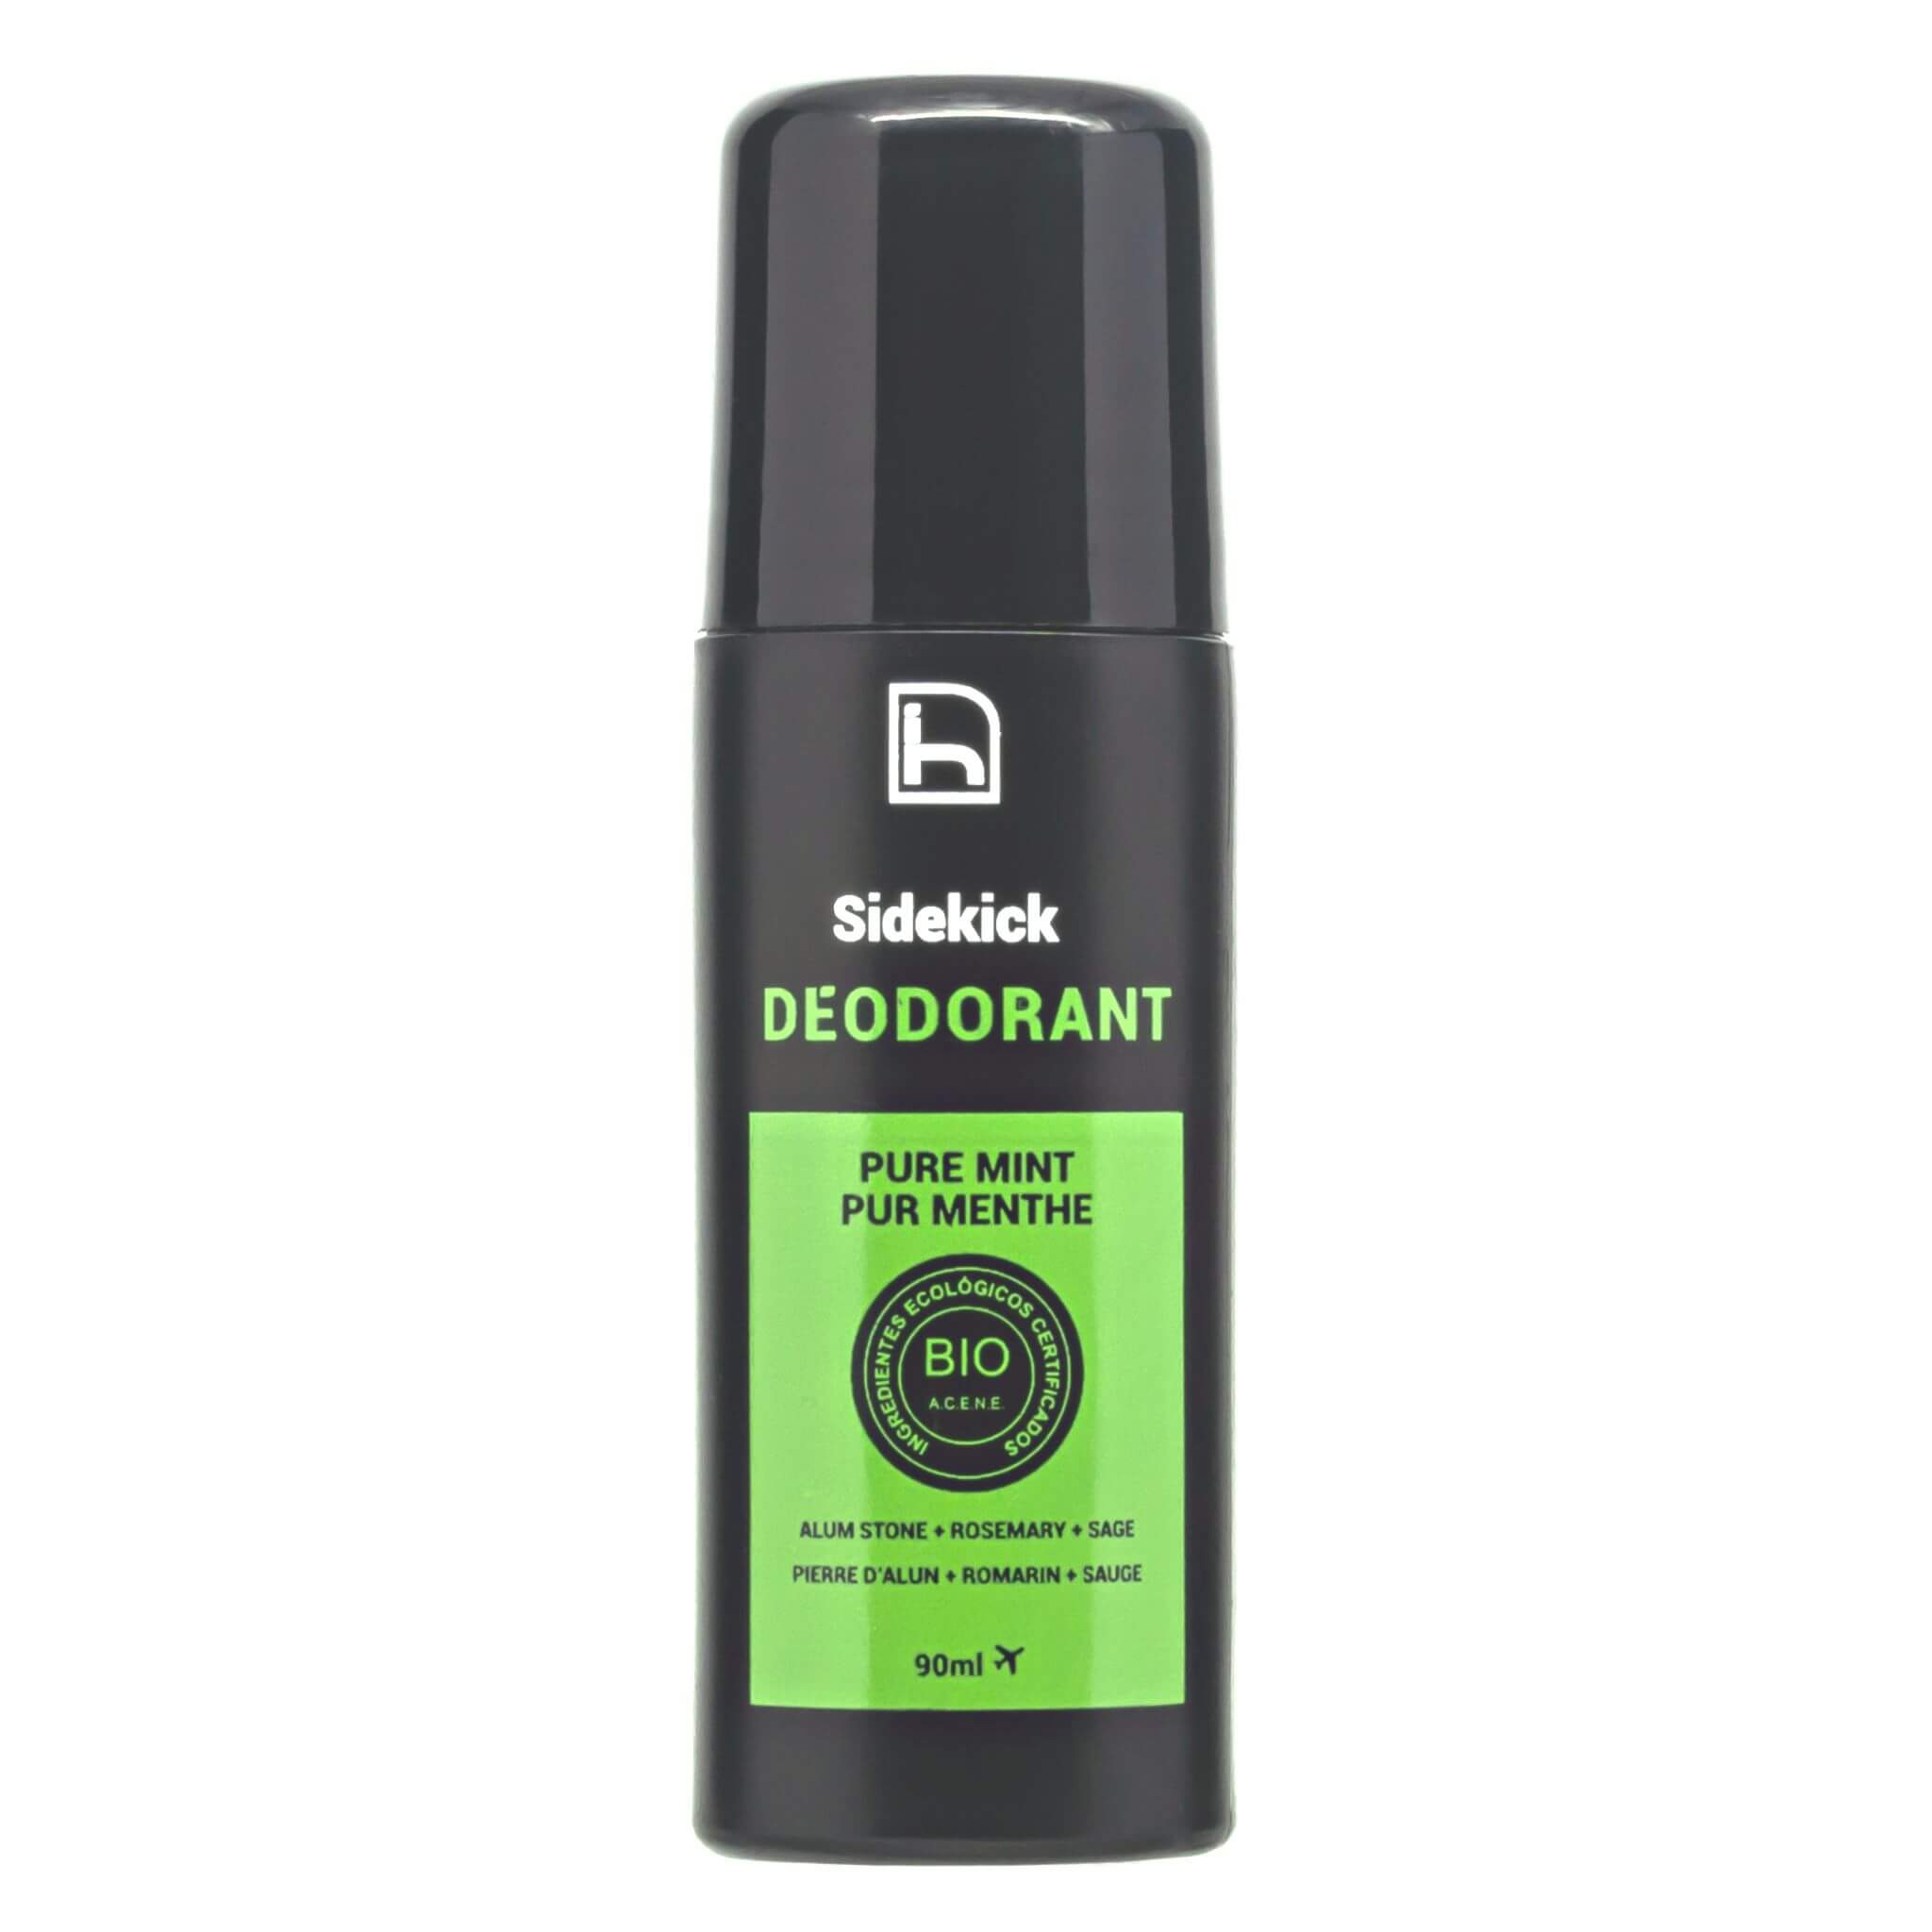 Natural and ecological deodorant for men. Organic certificate.